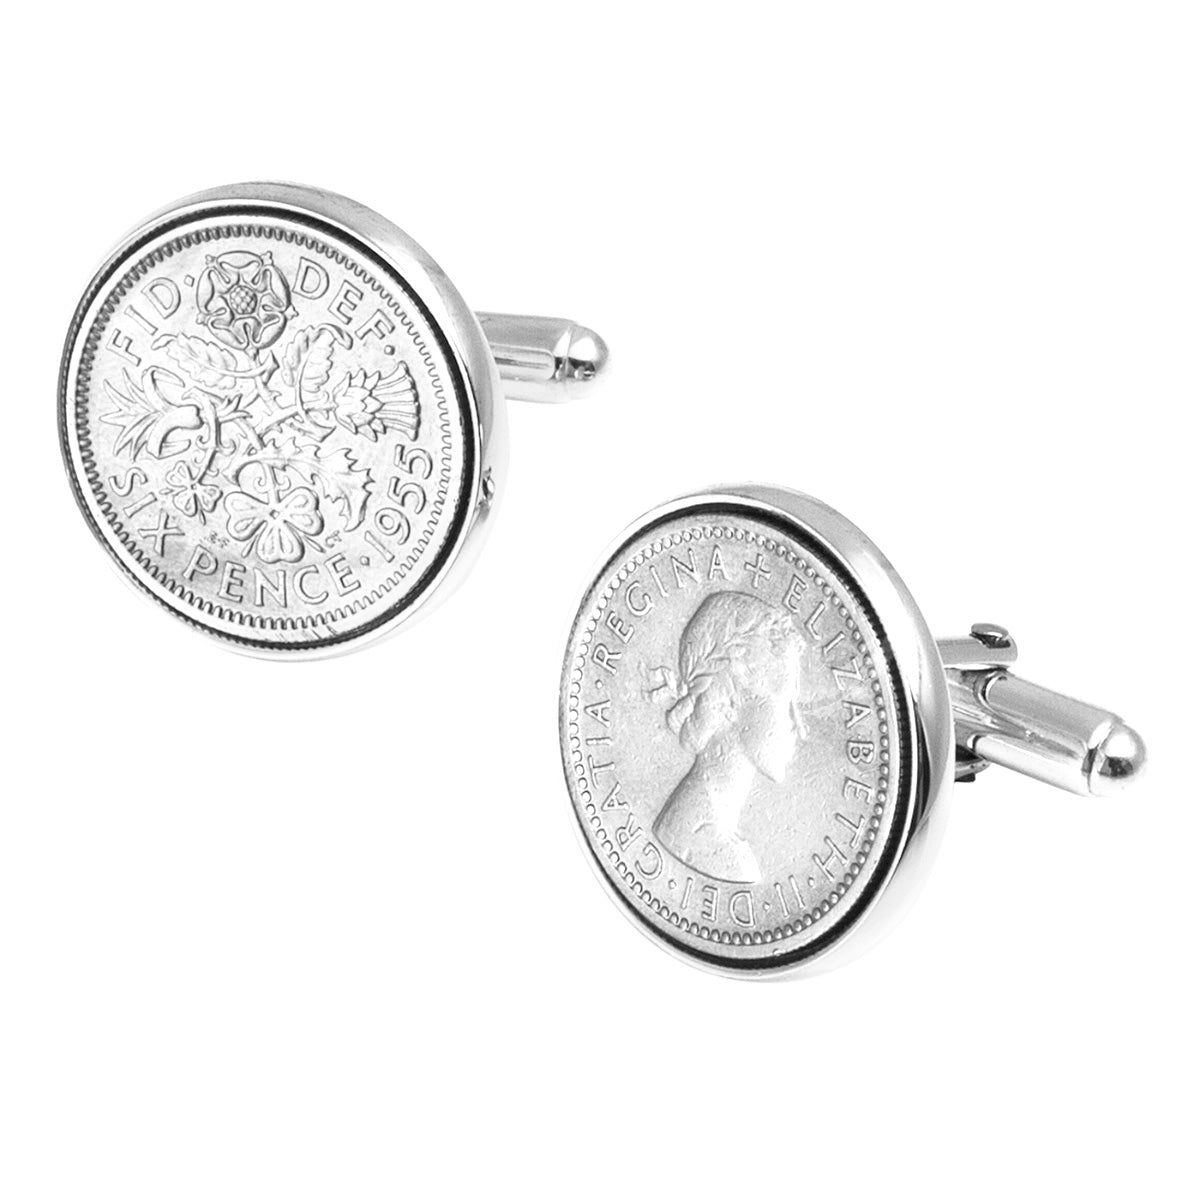 Silver Sixpence Cufflinks | Hersey & Son Silversmiths